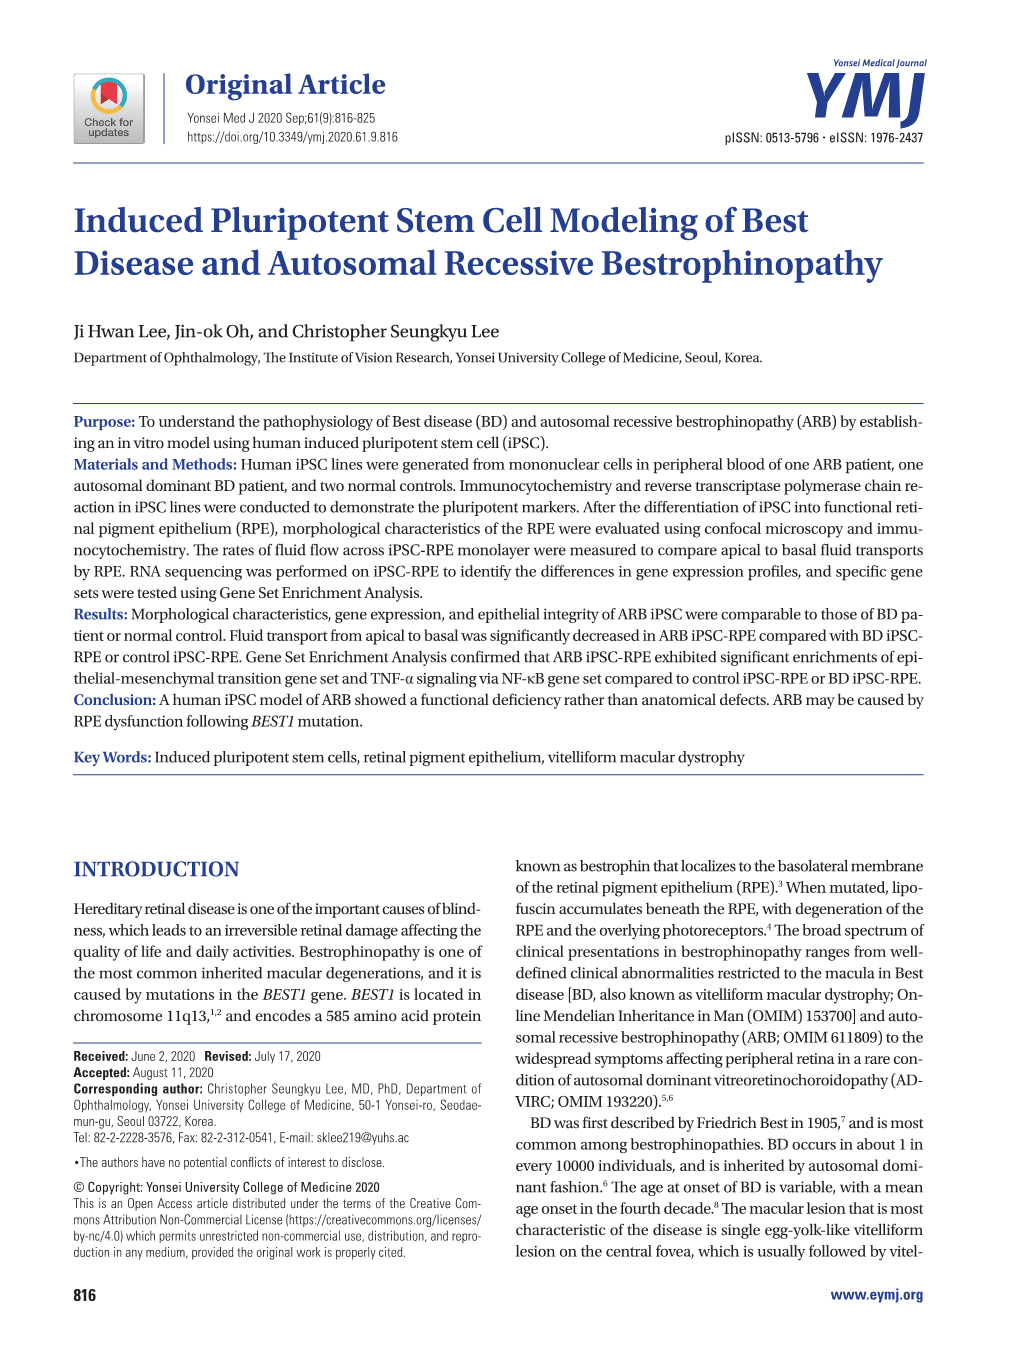 Induced Pluripotent Stem Cell Modeling of Best Disease and Autosomal Recessive Bestrophinopathy